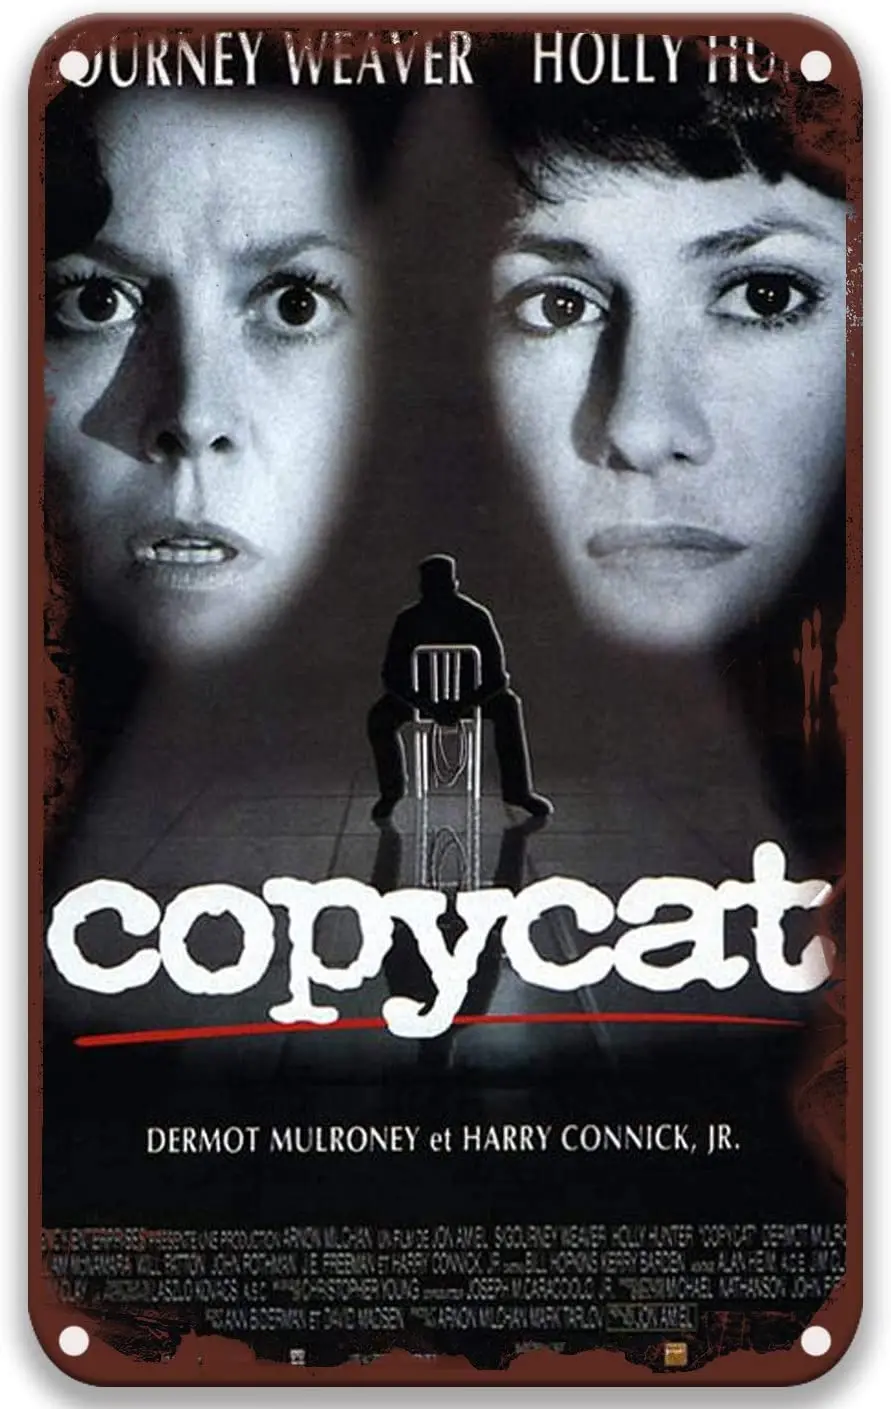 

Copycat (1995) Movie Tin Signs Vintage Movies Poster Plaque for Living Room Home Decor Bathroom Art 8x12 Inches